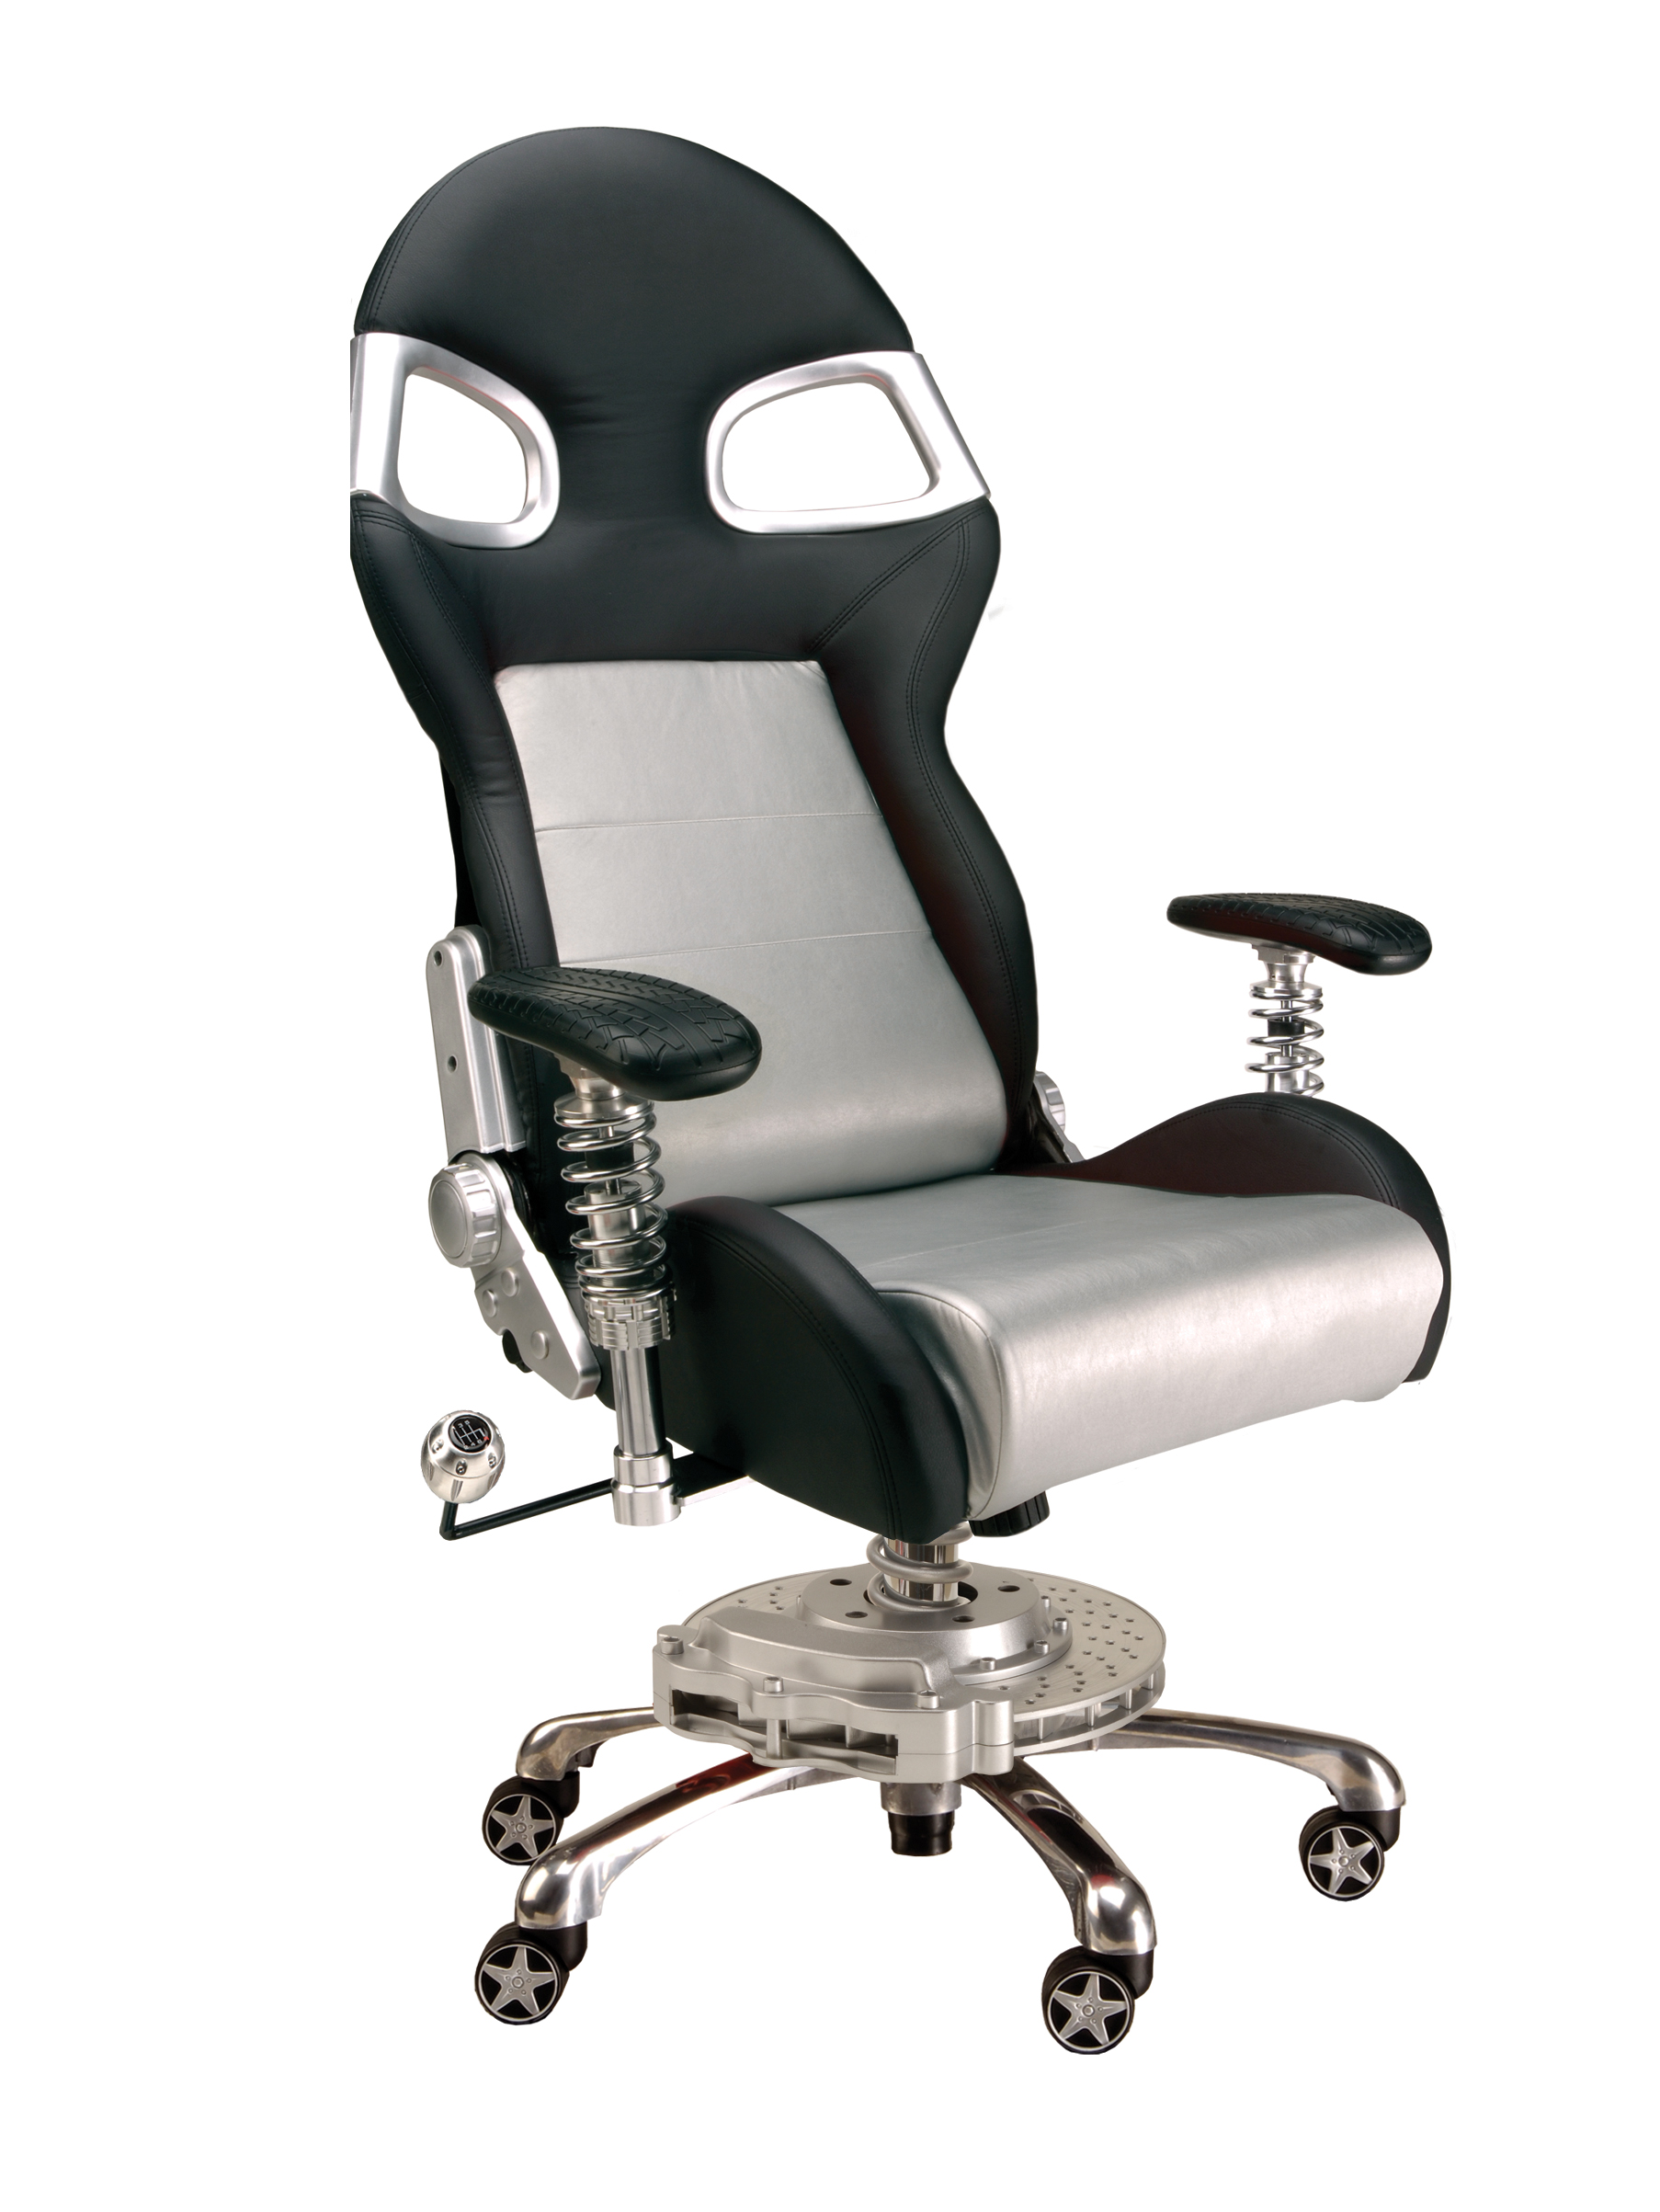 Intro-Tech Automotive, Pitstop Furniture, F08000S LXE Chair Silver, Desk Chair